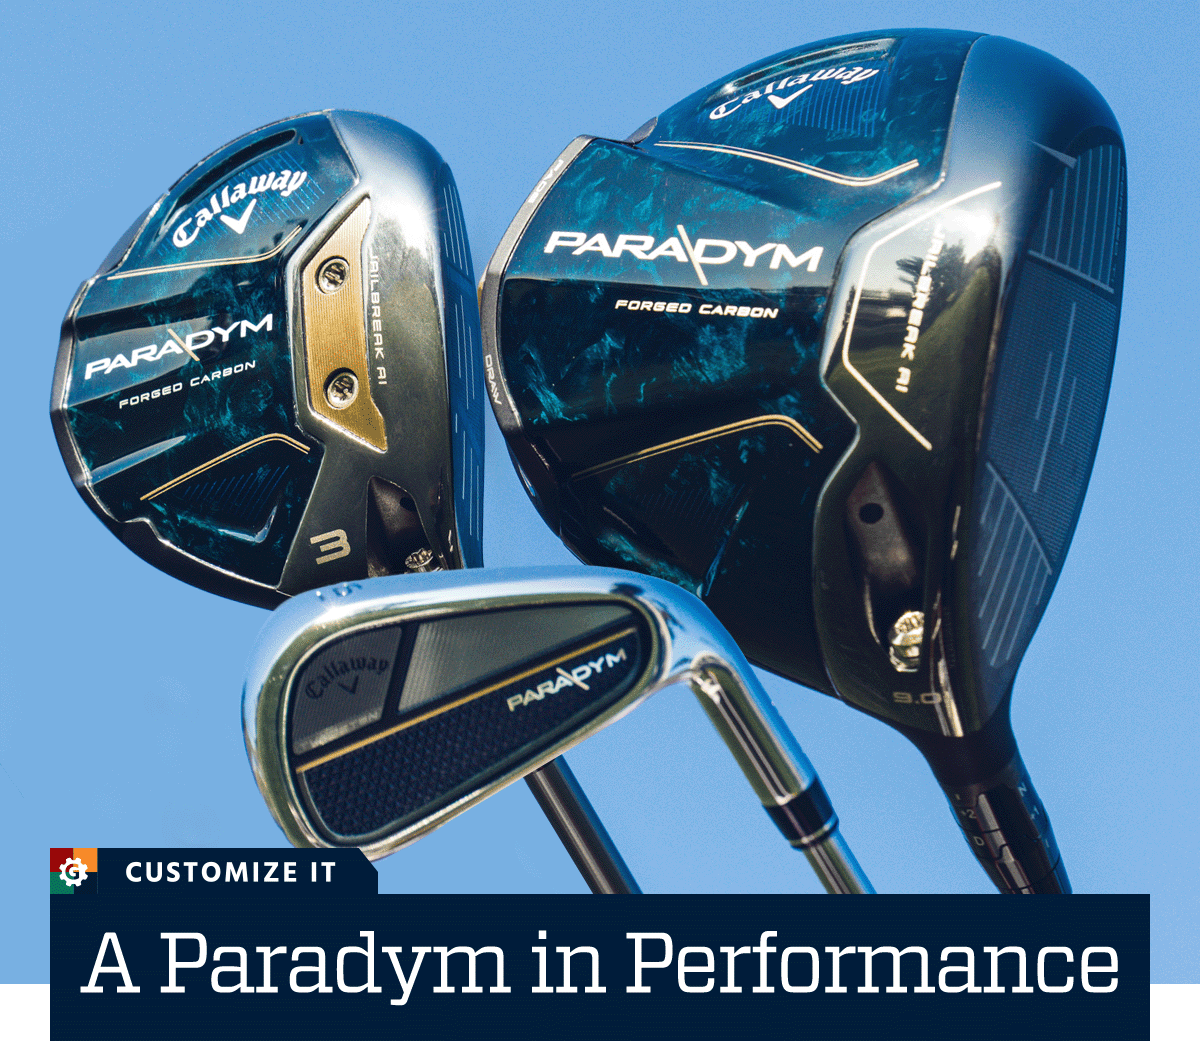  A Paradym in performance. Customize it.